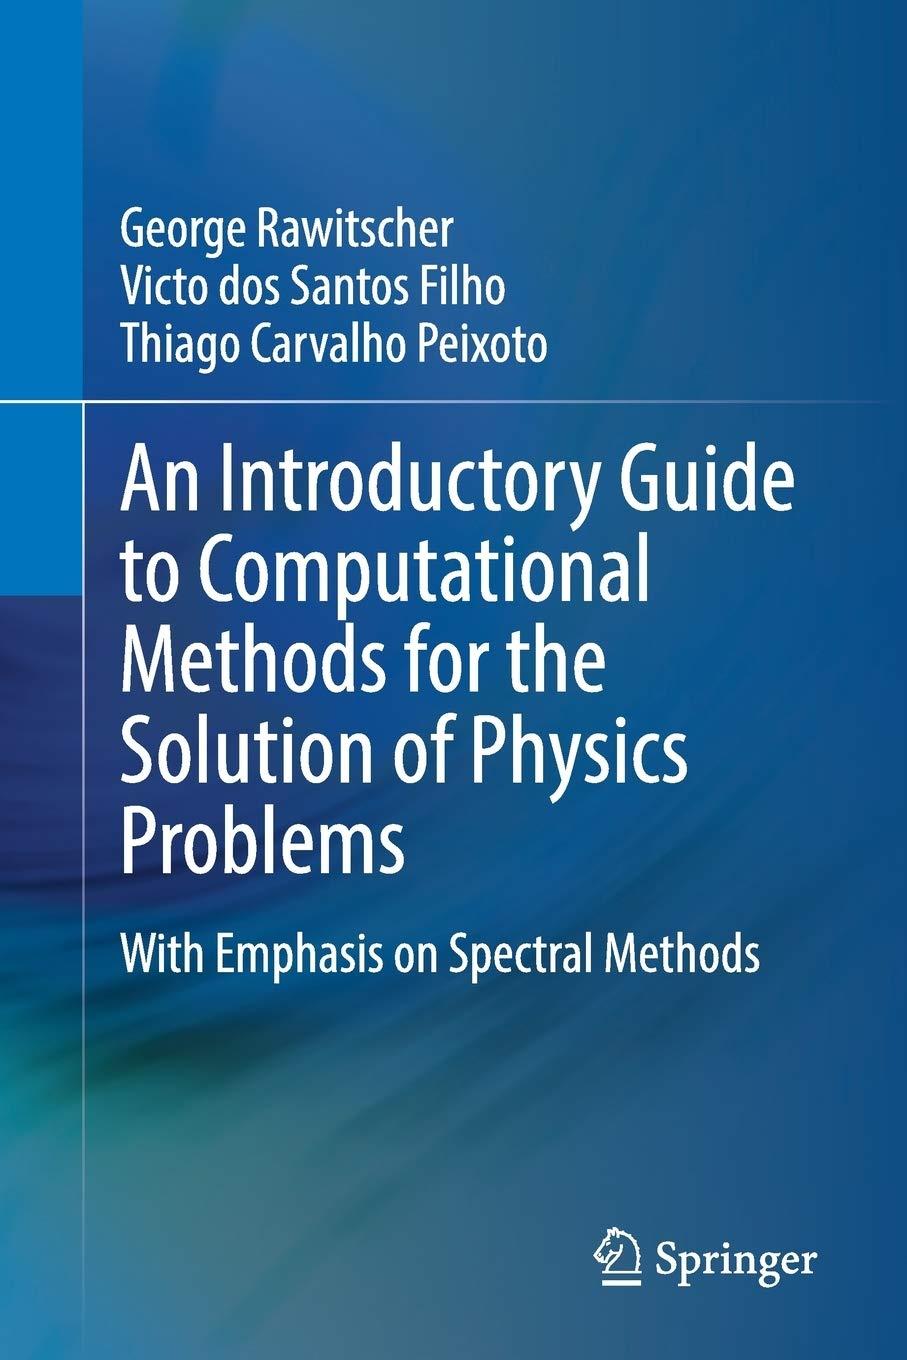 an introductory guide to computational methods for the solution of physics problems with emphasis on spectral